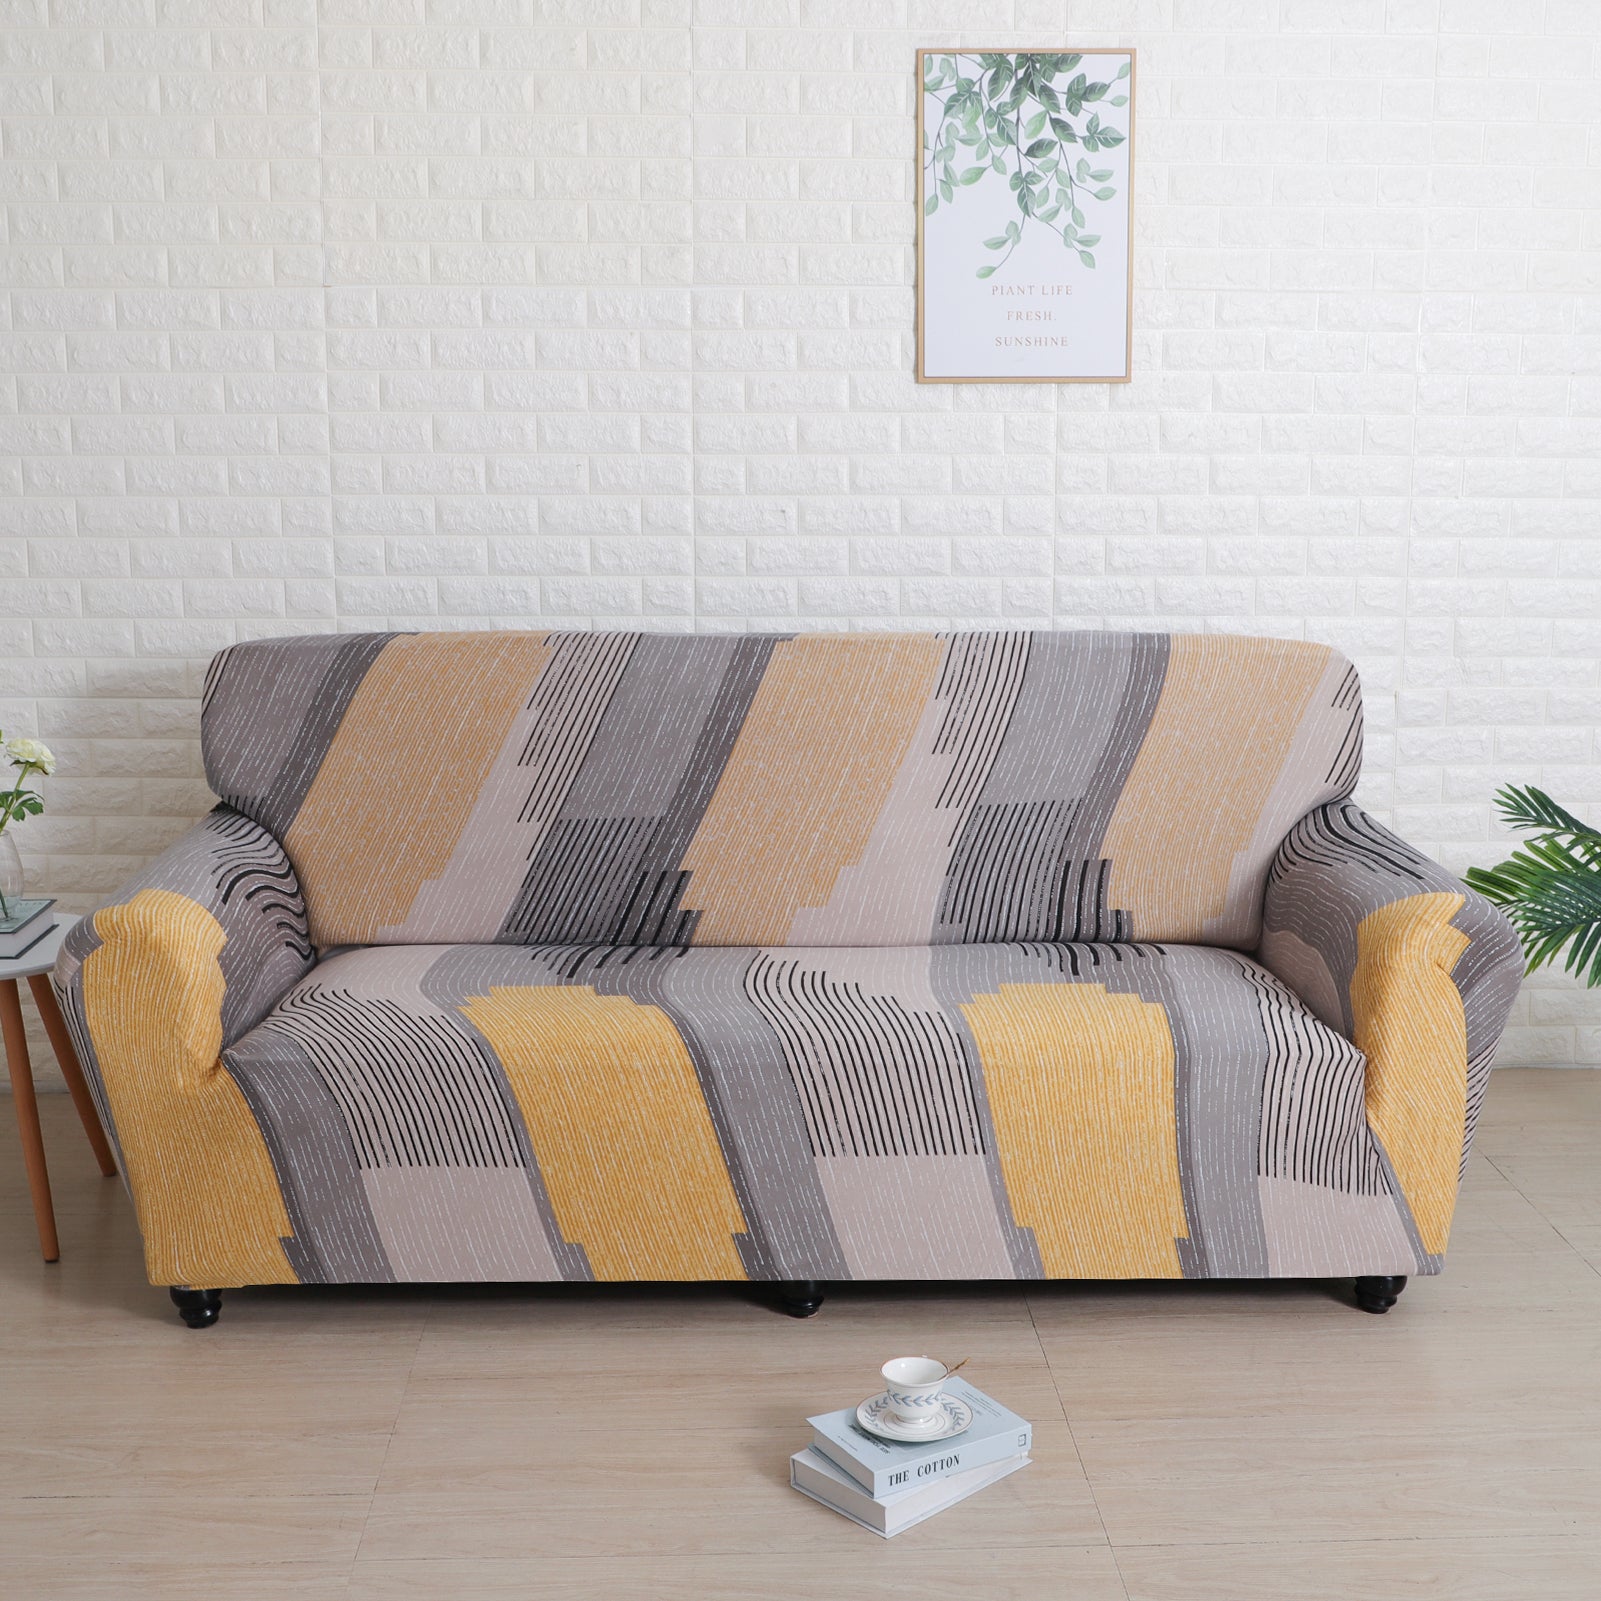 Abstract Elegance Fitted 3 Seater Sofa Cover Mustard & Multicolor